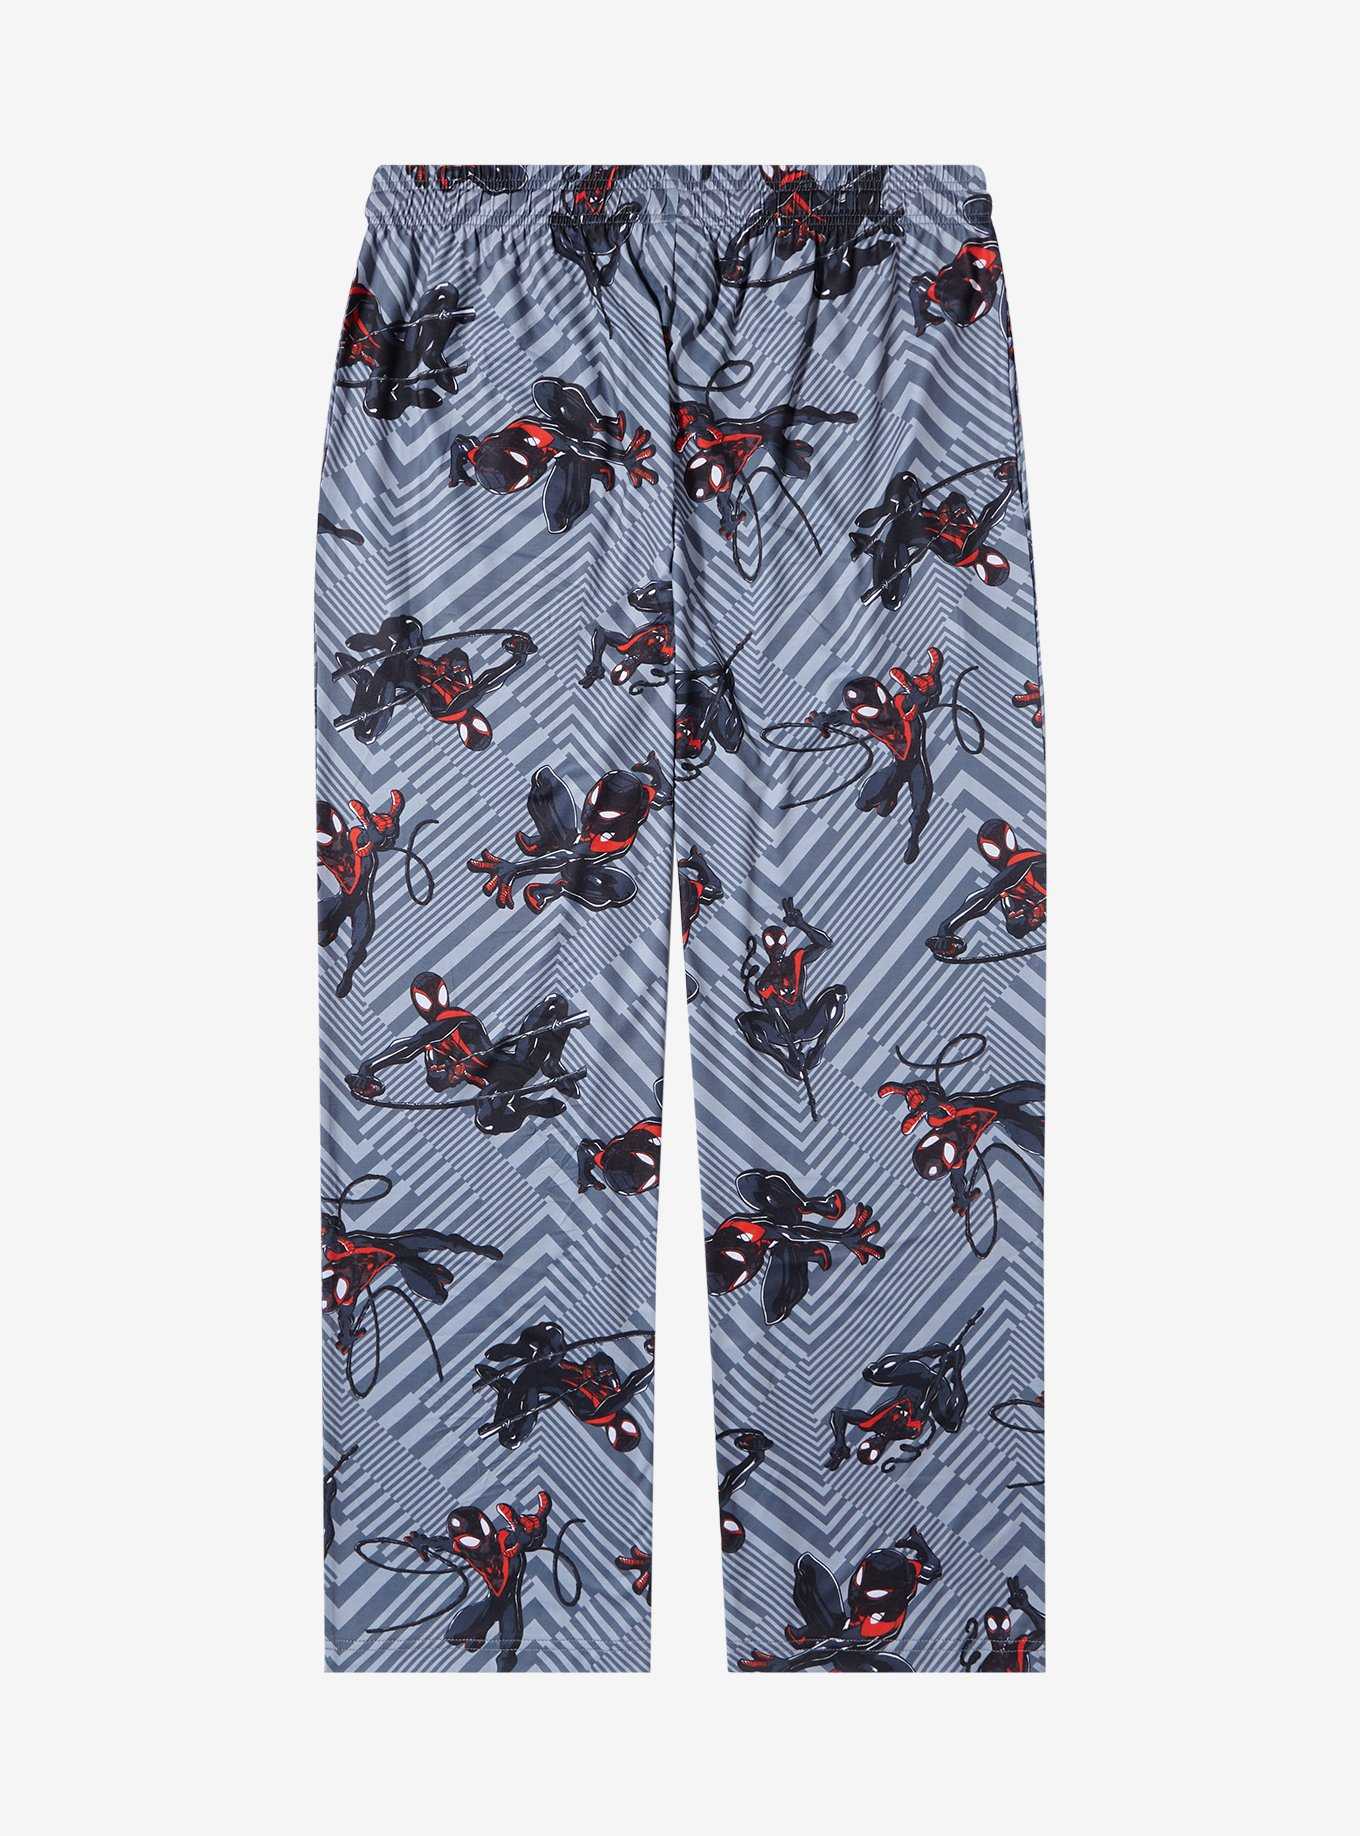 Marvel Spider-Man Miles Morales Allover Print Women's Plus Size Sleep Pants - BoxLunch Exclusive, , hi-res